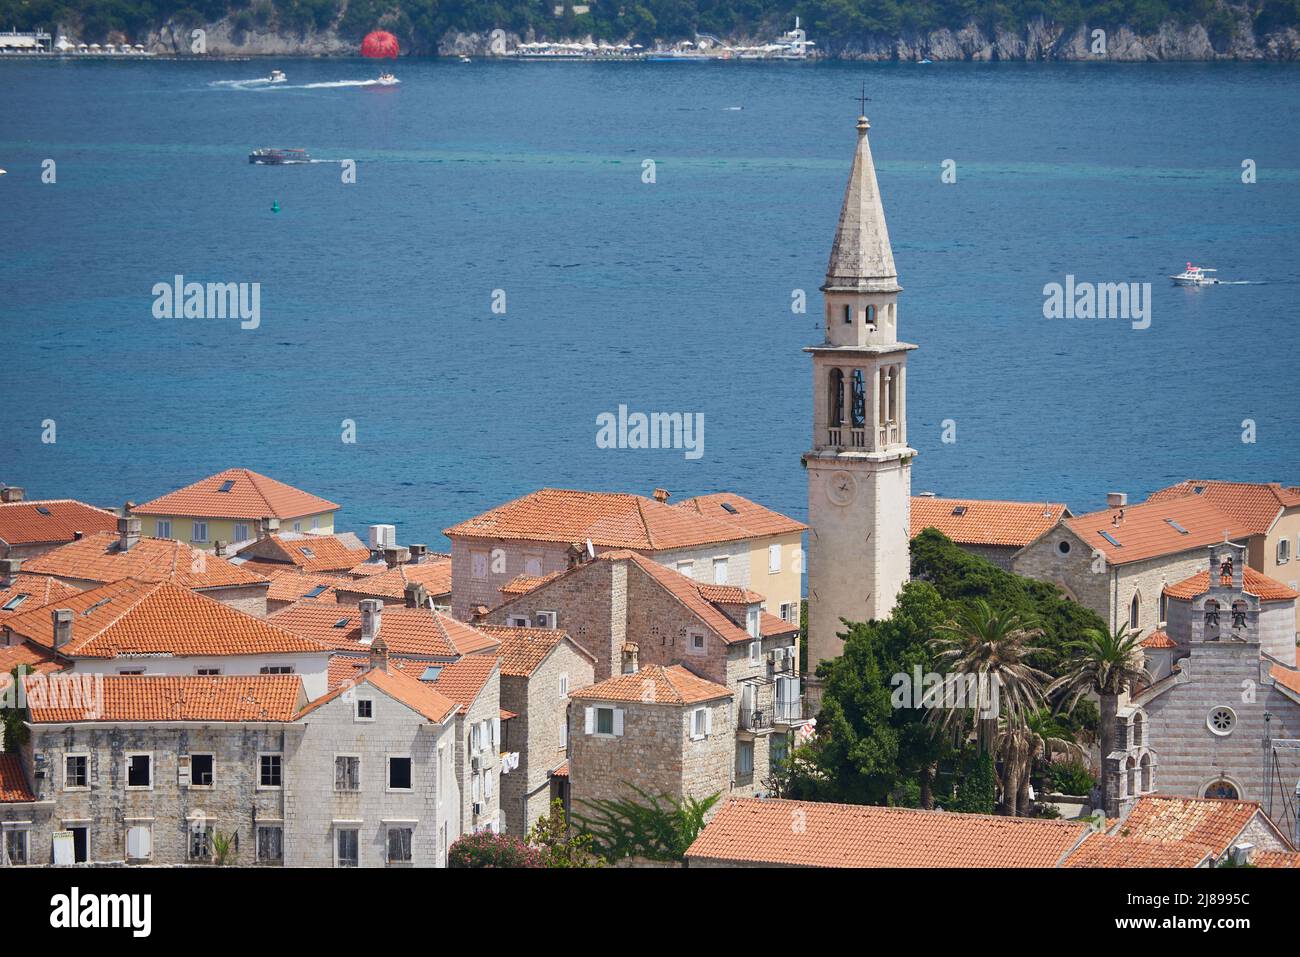 Old town with tower in Budva against sea Stock Photo